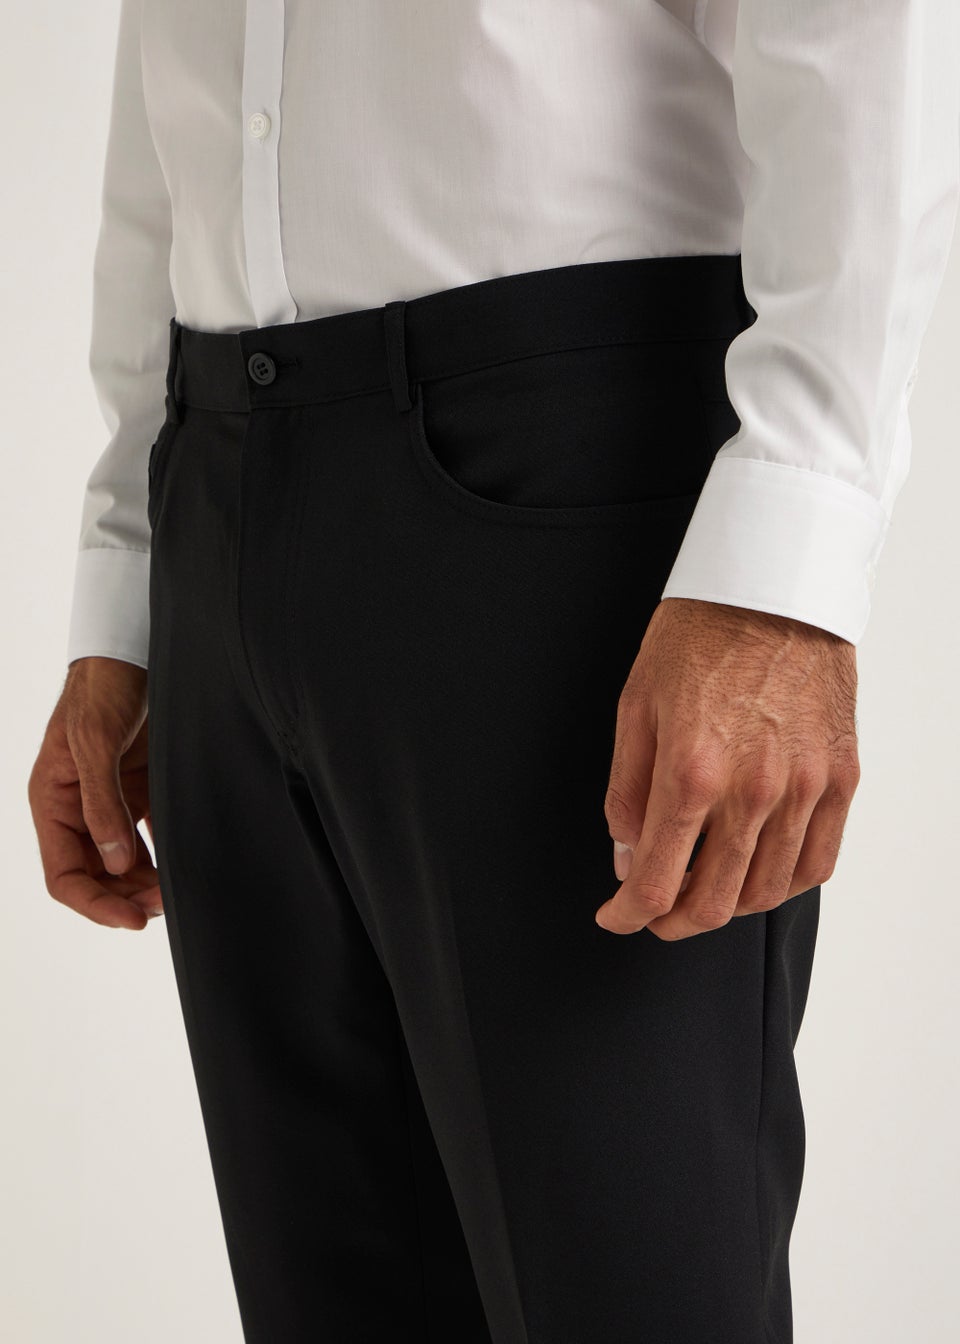 Taylor & Wright Black Slim Fit Formal Trousers